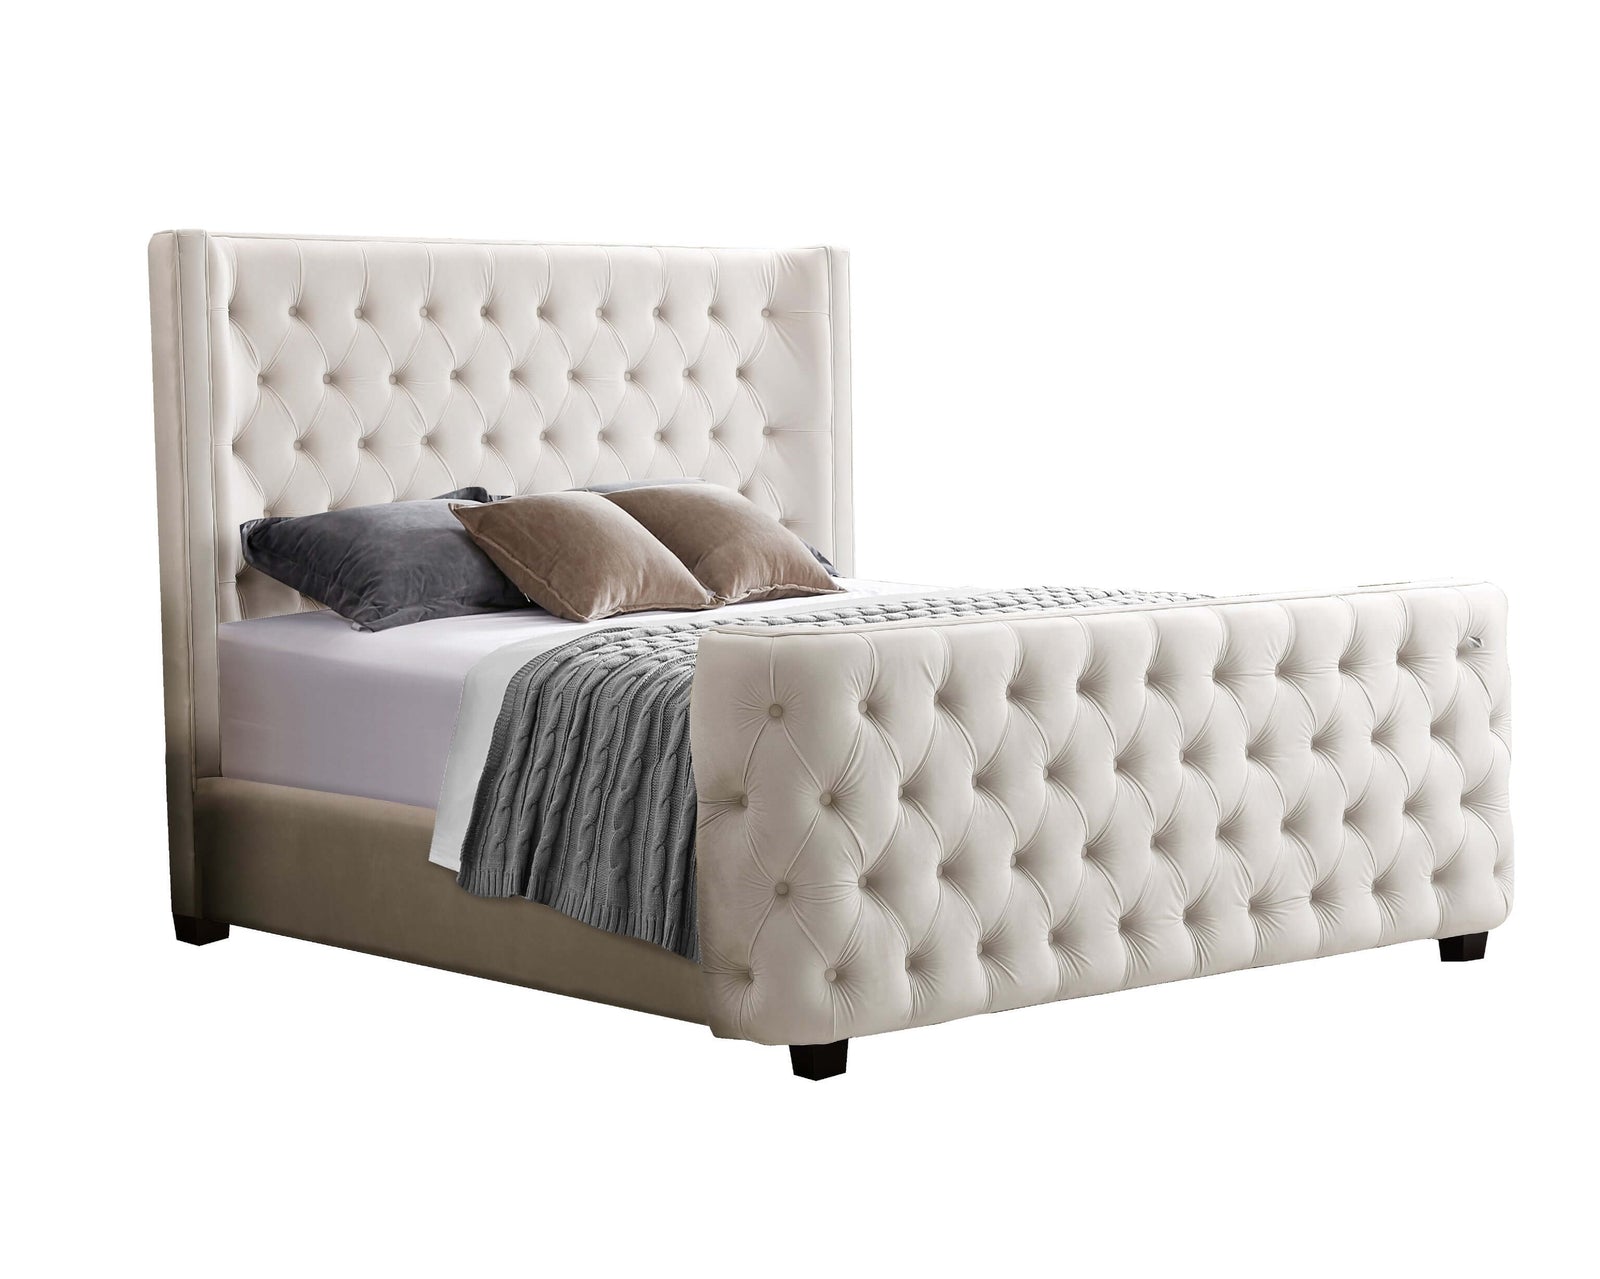 Milan Cream Velvet Tufted Headboard and End board Bed Frame - Queen Size-Upinteriors